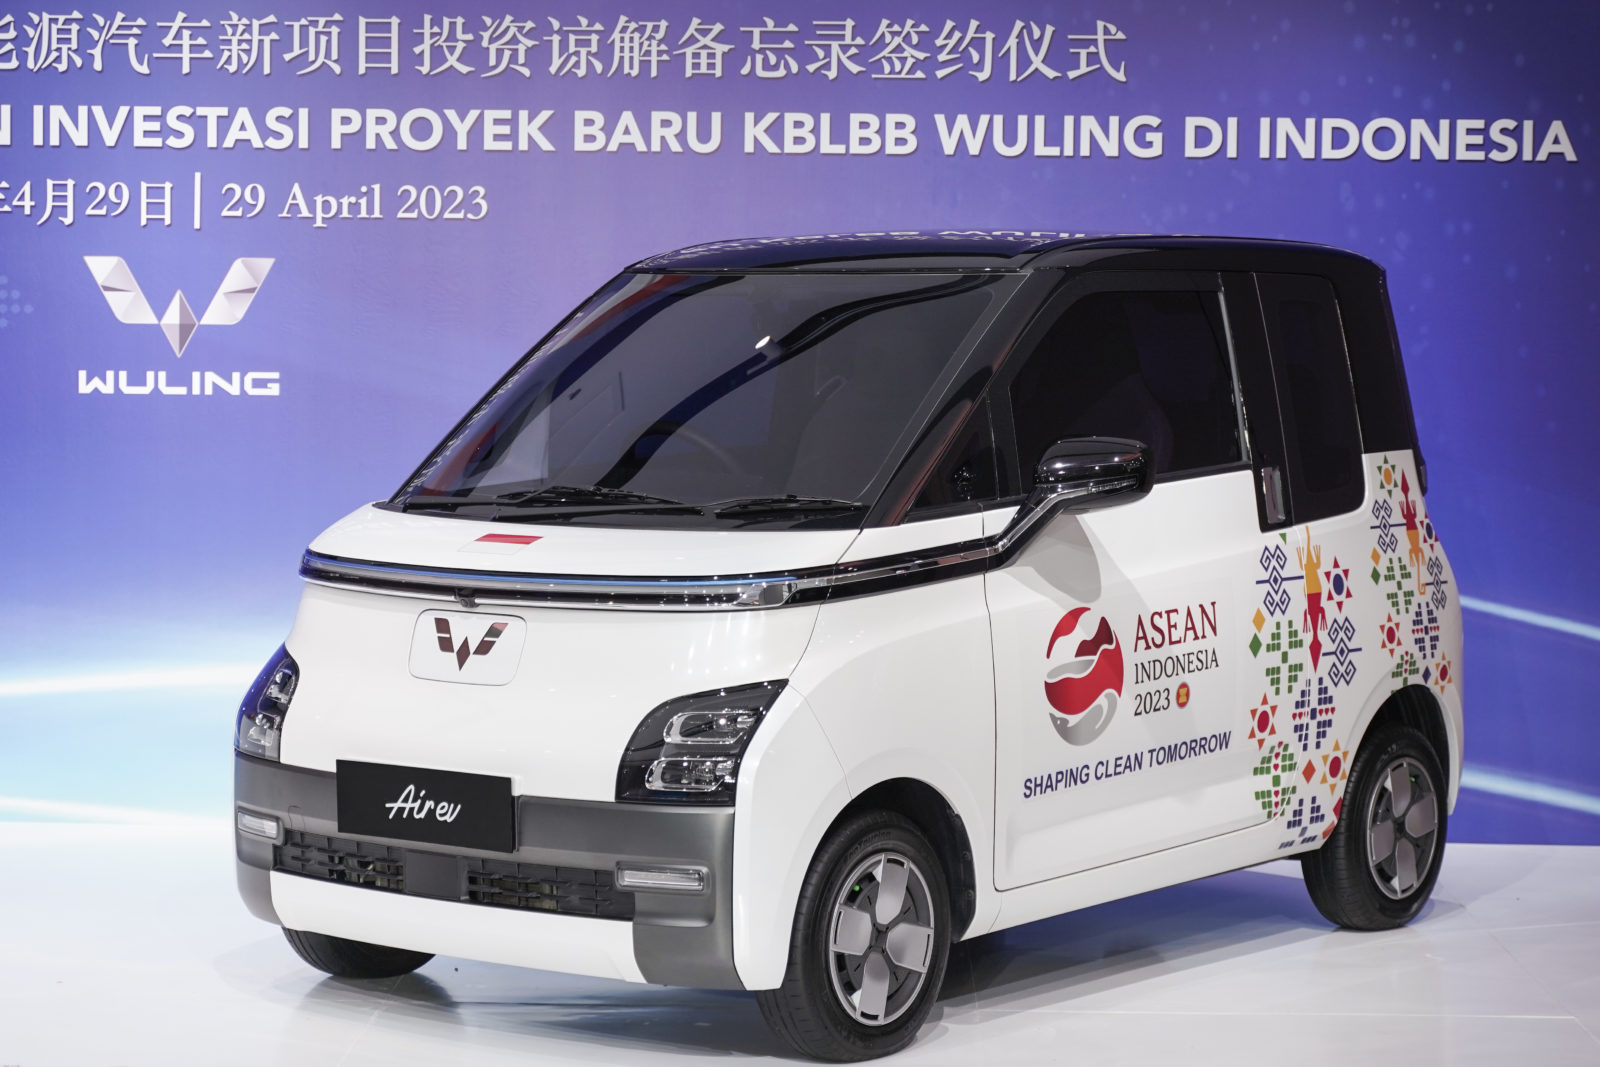 Image Wuling Air ev Ready to Support ASEAN Summit 2023 in Labuan Bajo as Official Car Partner